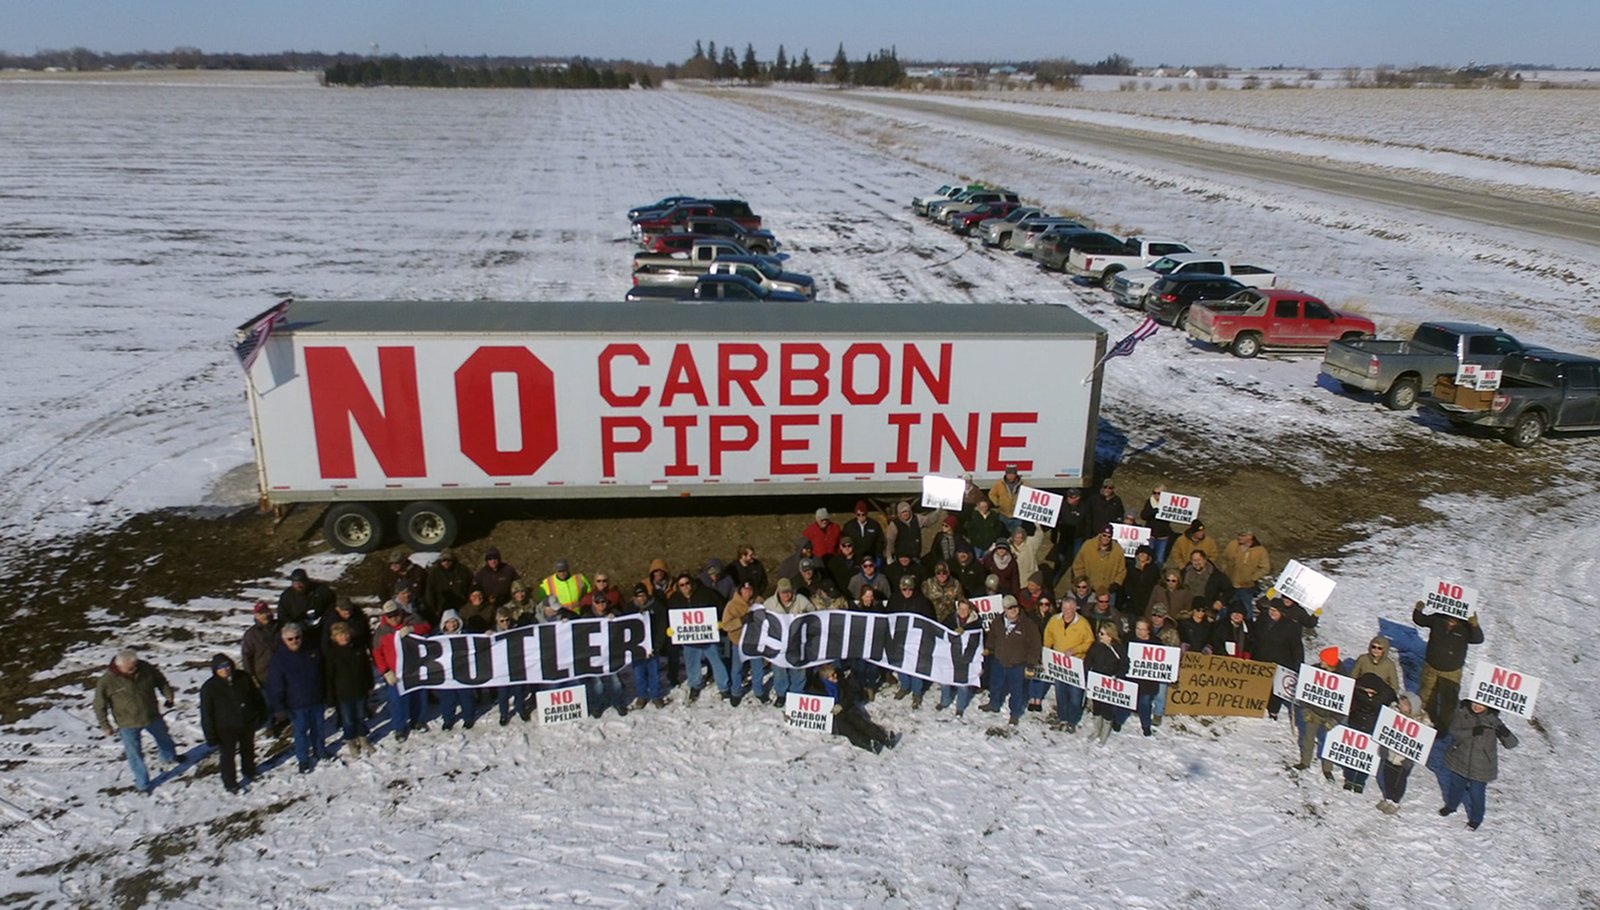 Carbon pipeline protest in Butler County, Iowa. Source: Anonymous